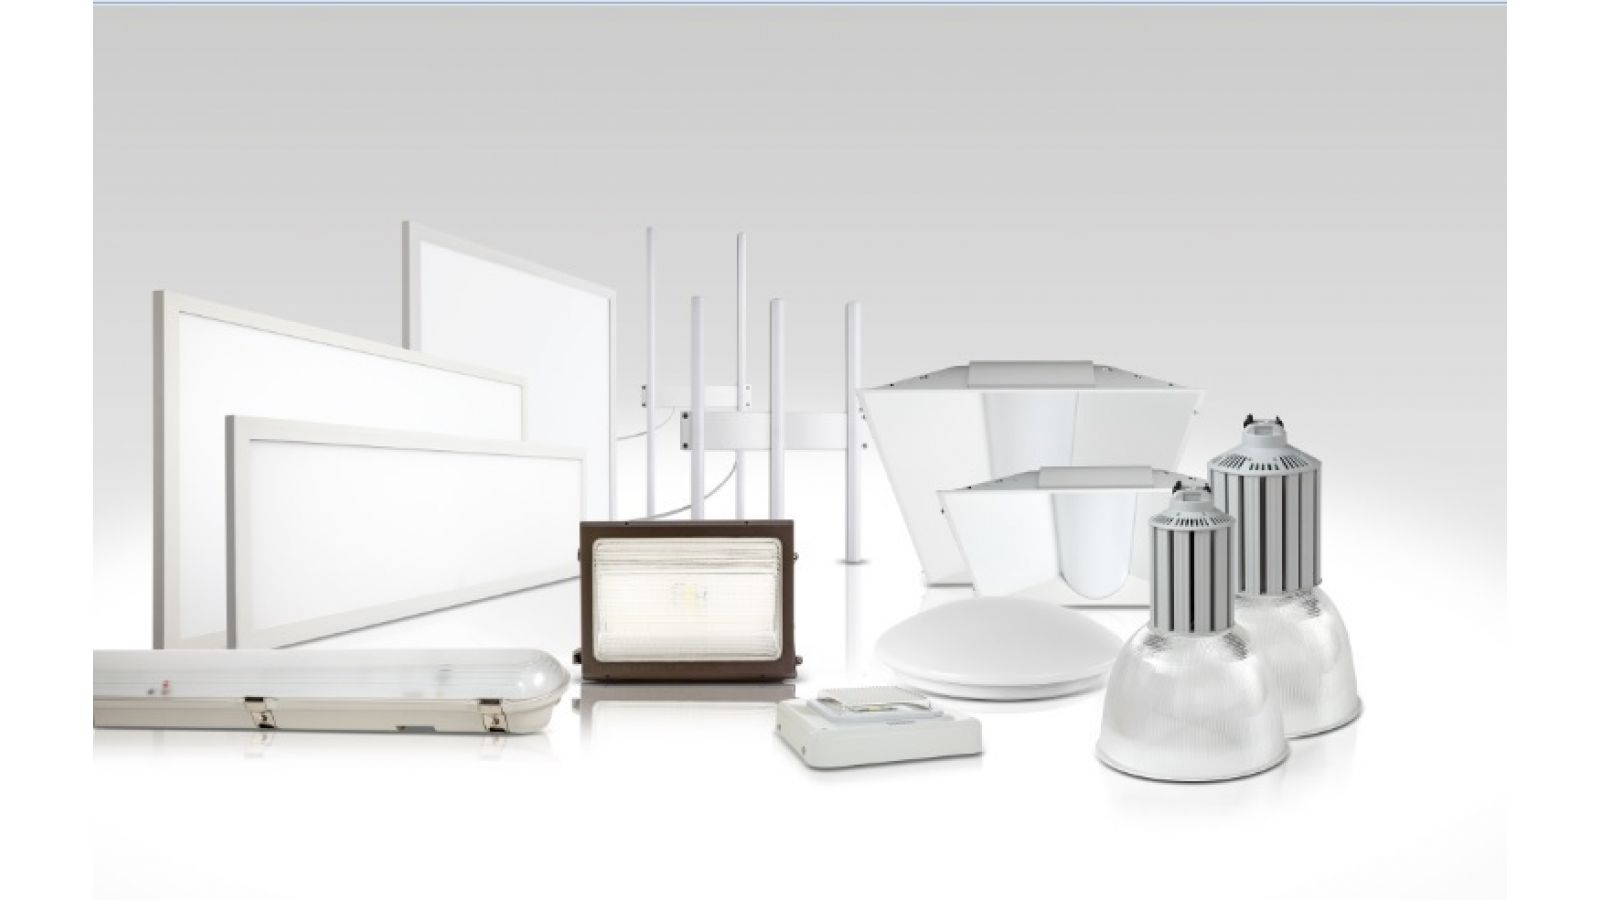 SYLVANIA LED Indoor and Outdoor Luminaires and Retrofit Kits